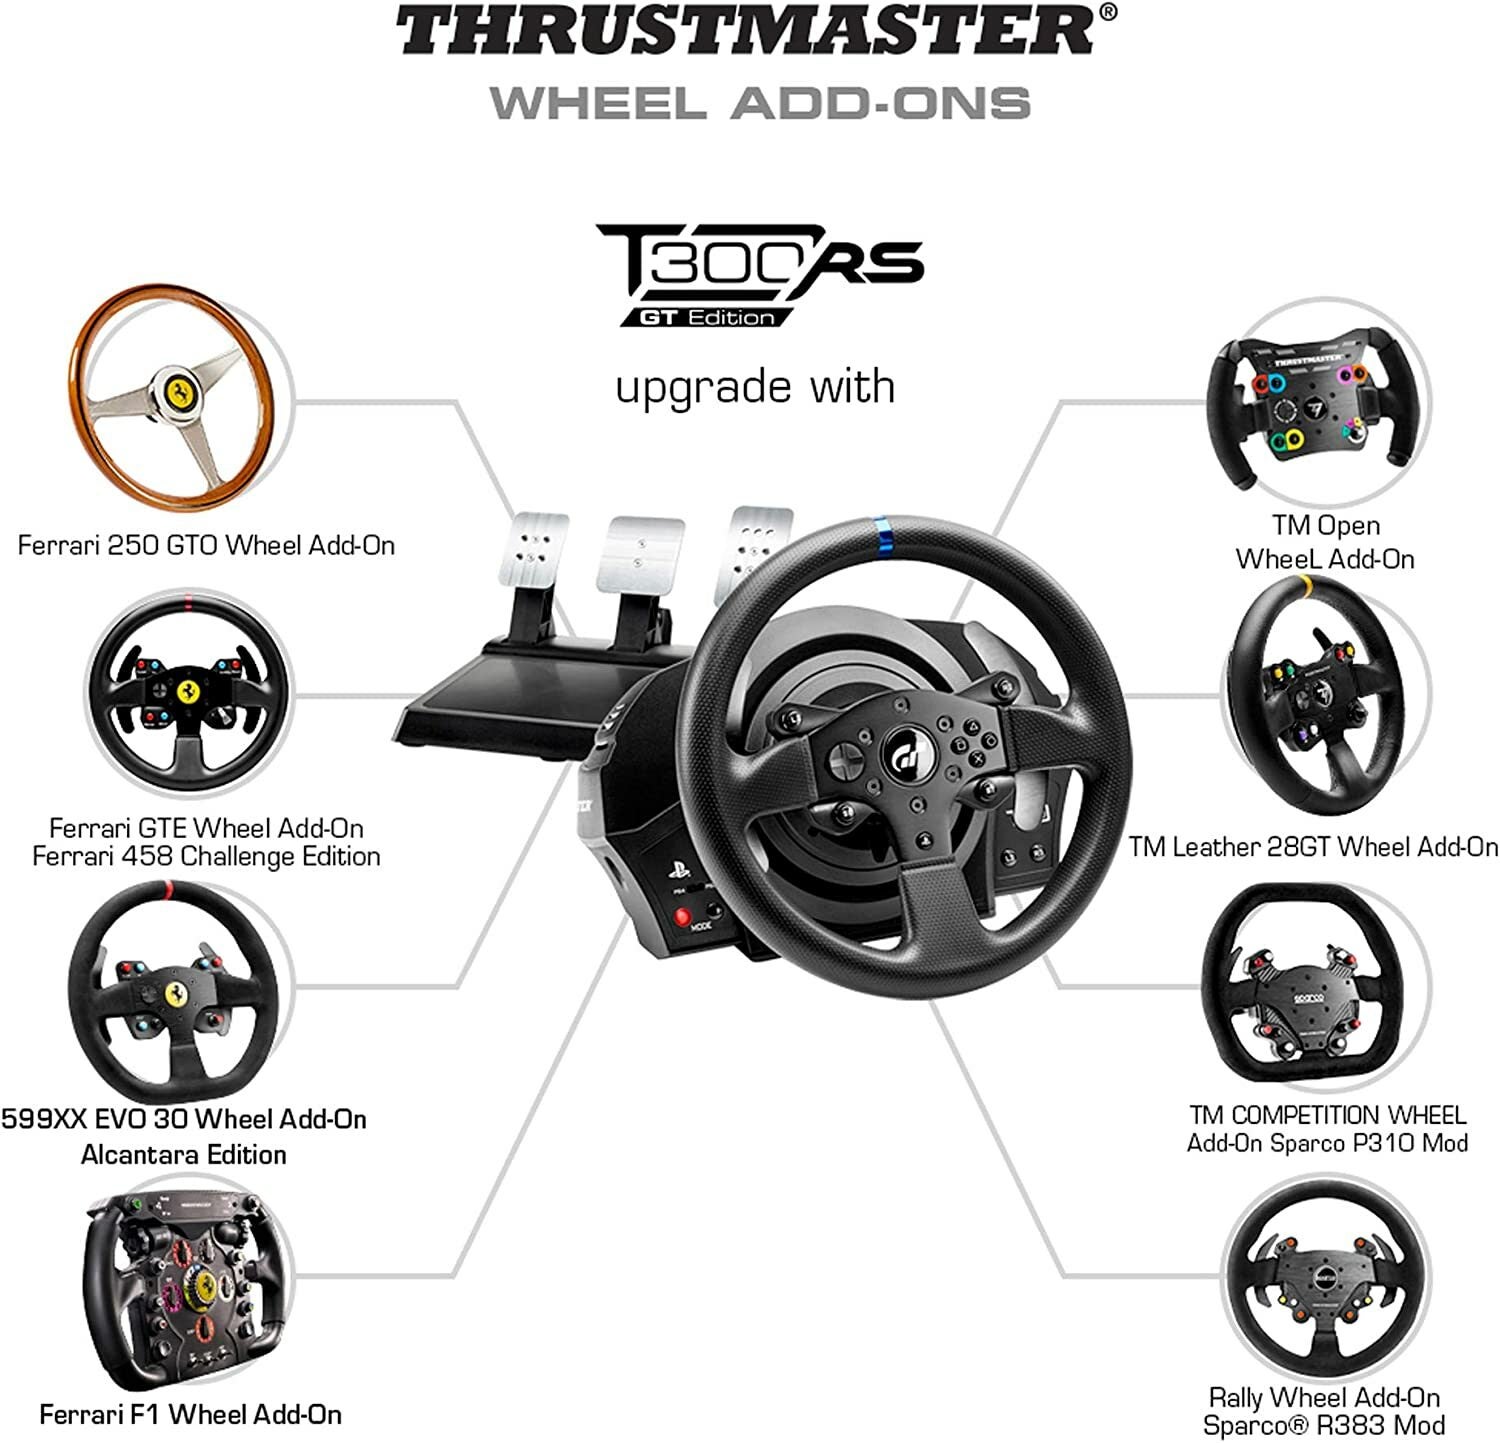 Amazon.ca] Thrustmaster T300 RS - GT Edition Racing Wheel & Pedals